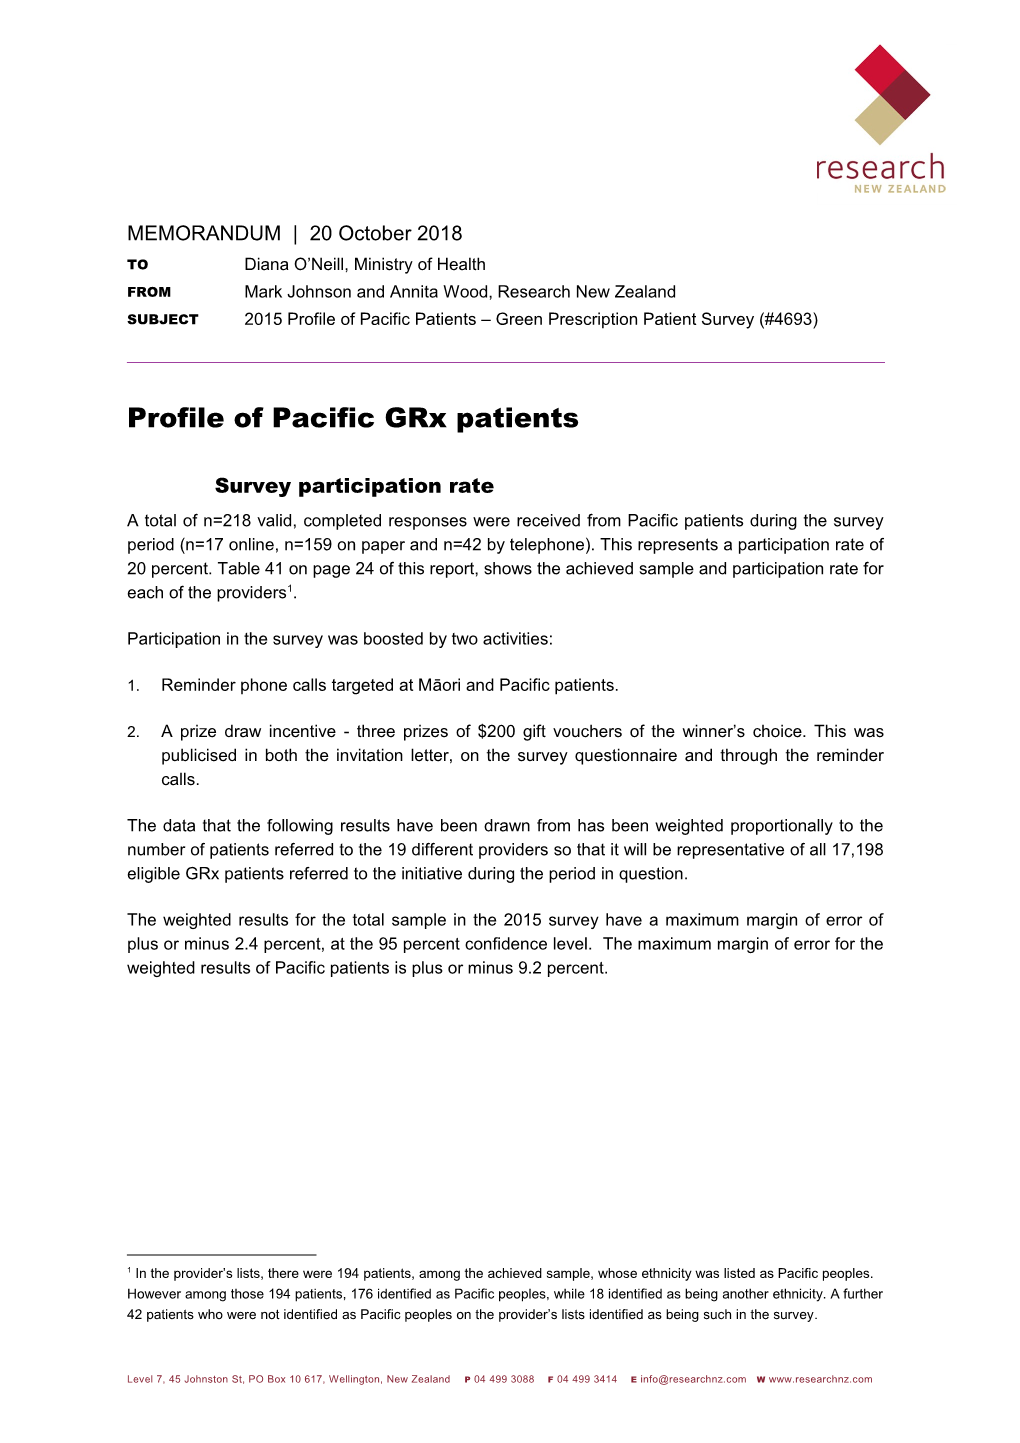 Profile of Pacific Grx Patients